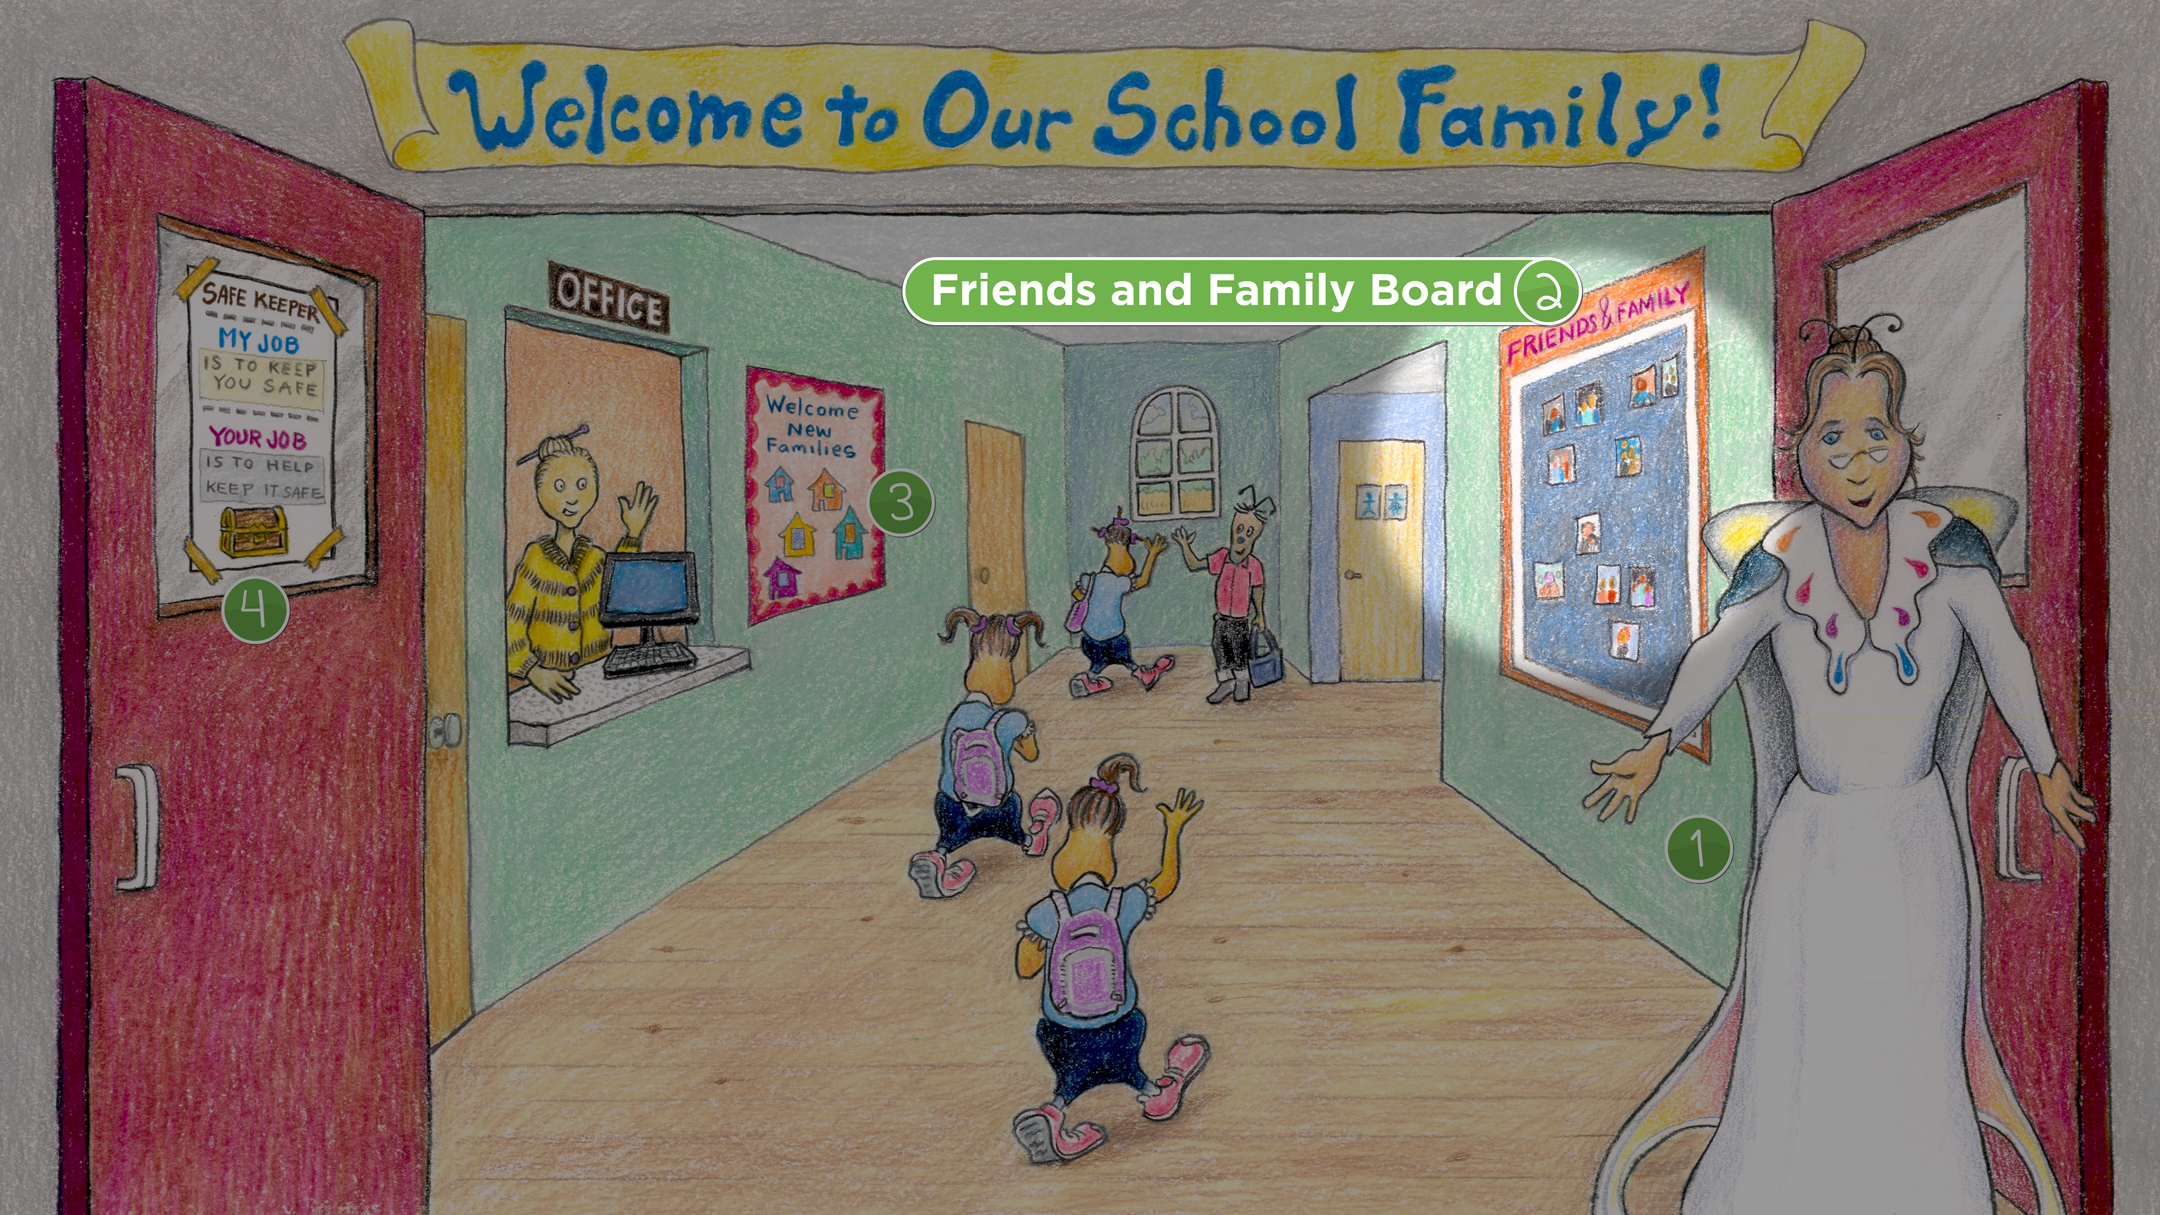 Entrance: Friends and Family Board